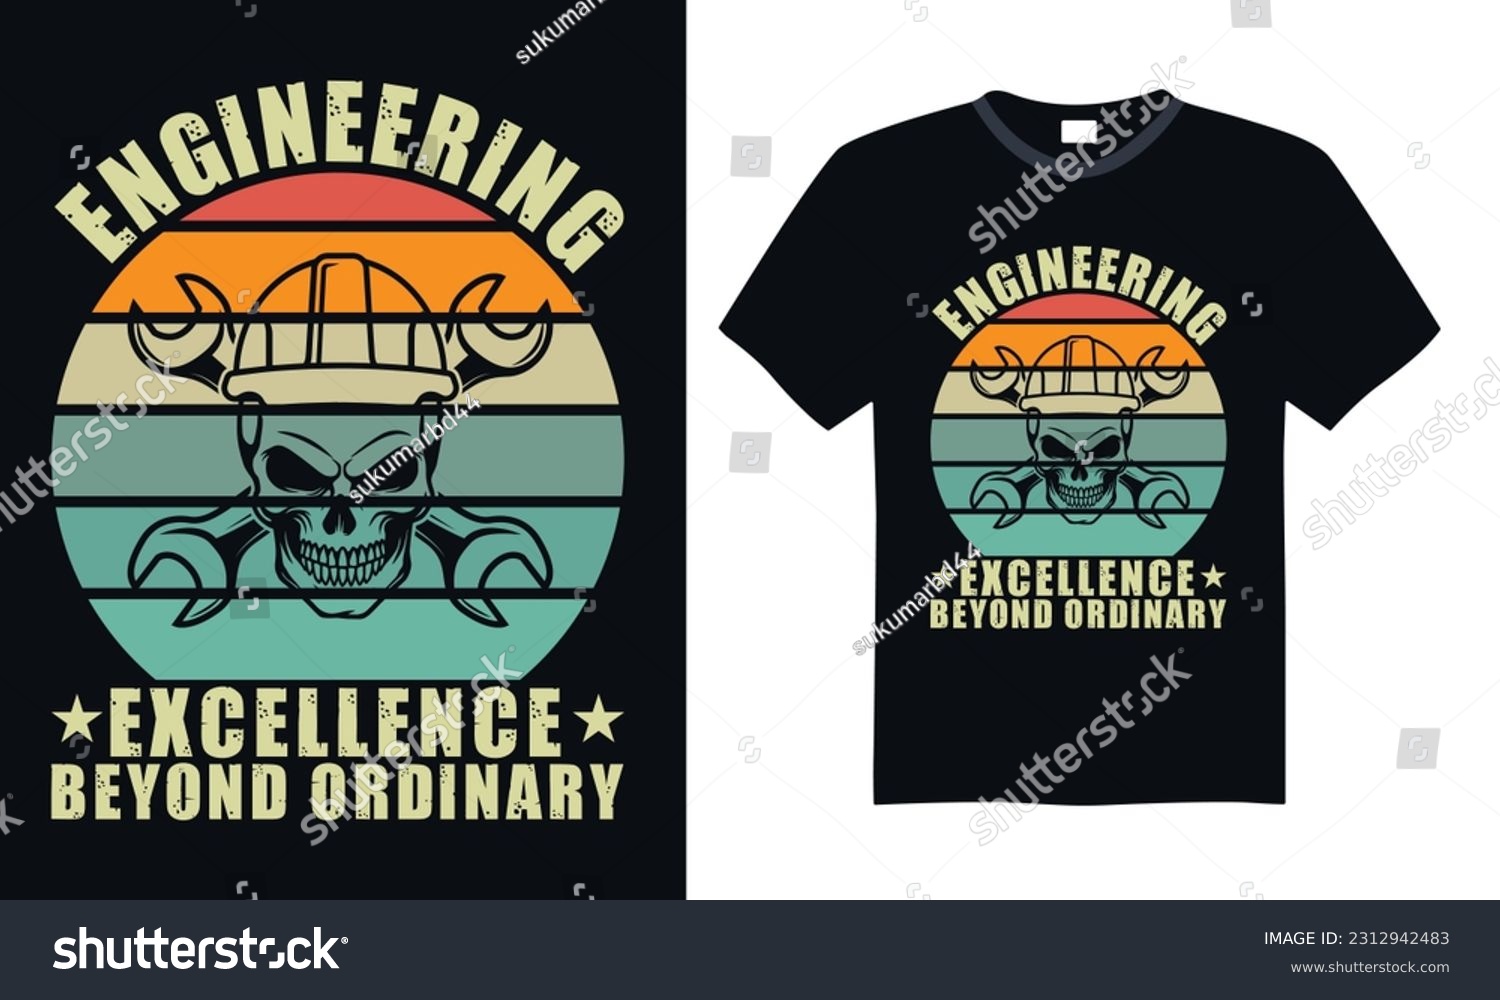 SVG of Engineering Excellence Beyond Ordinary - Engineering T-shirt Design, SVG Files for Cutting, Handmade calligraphy vector illustration, Hand written vector sign svg